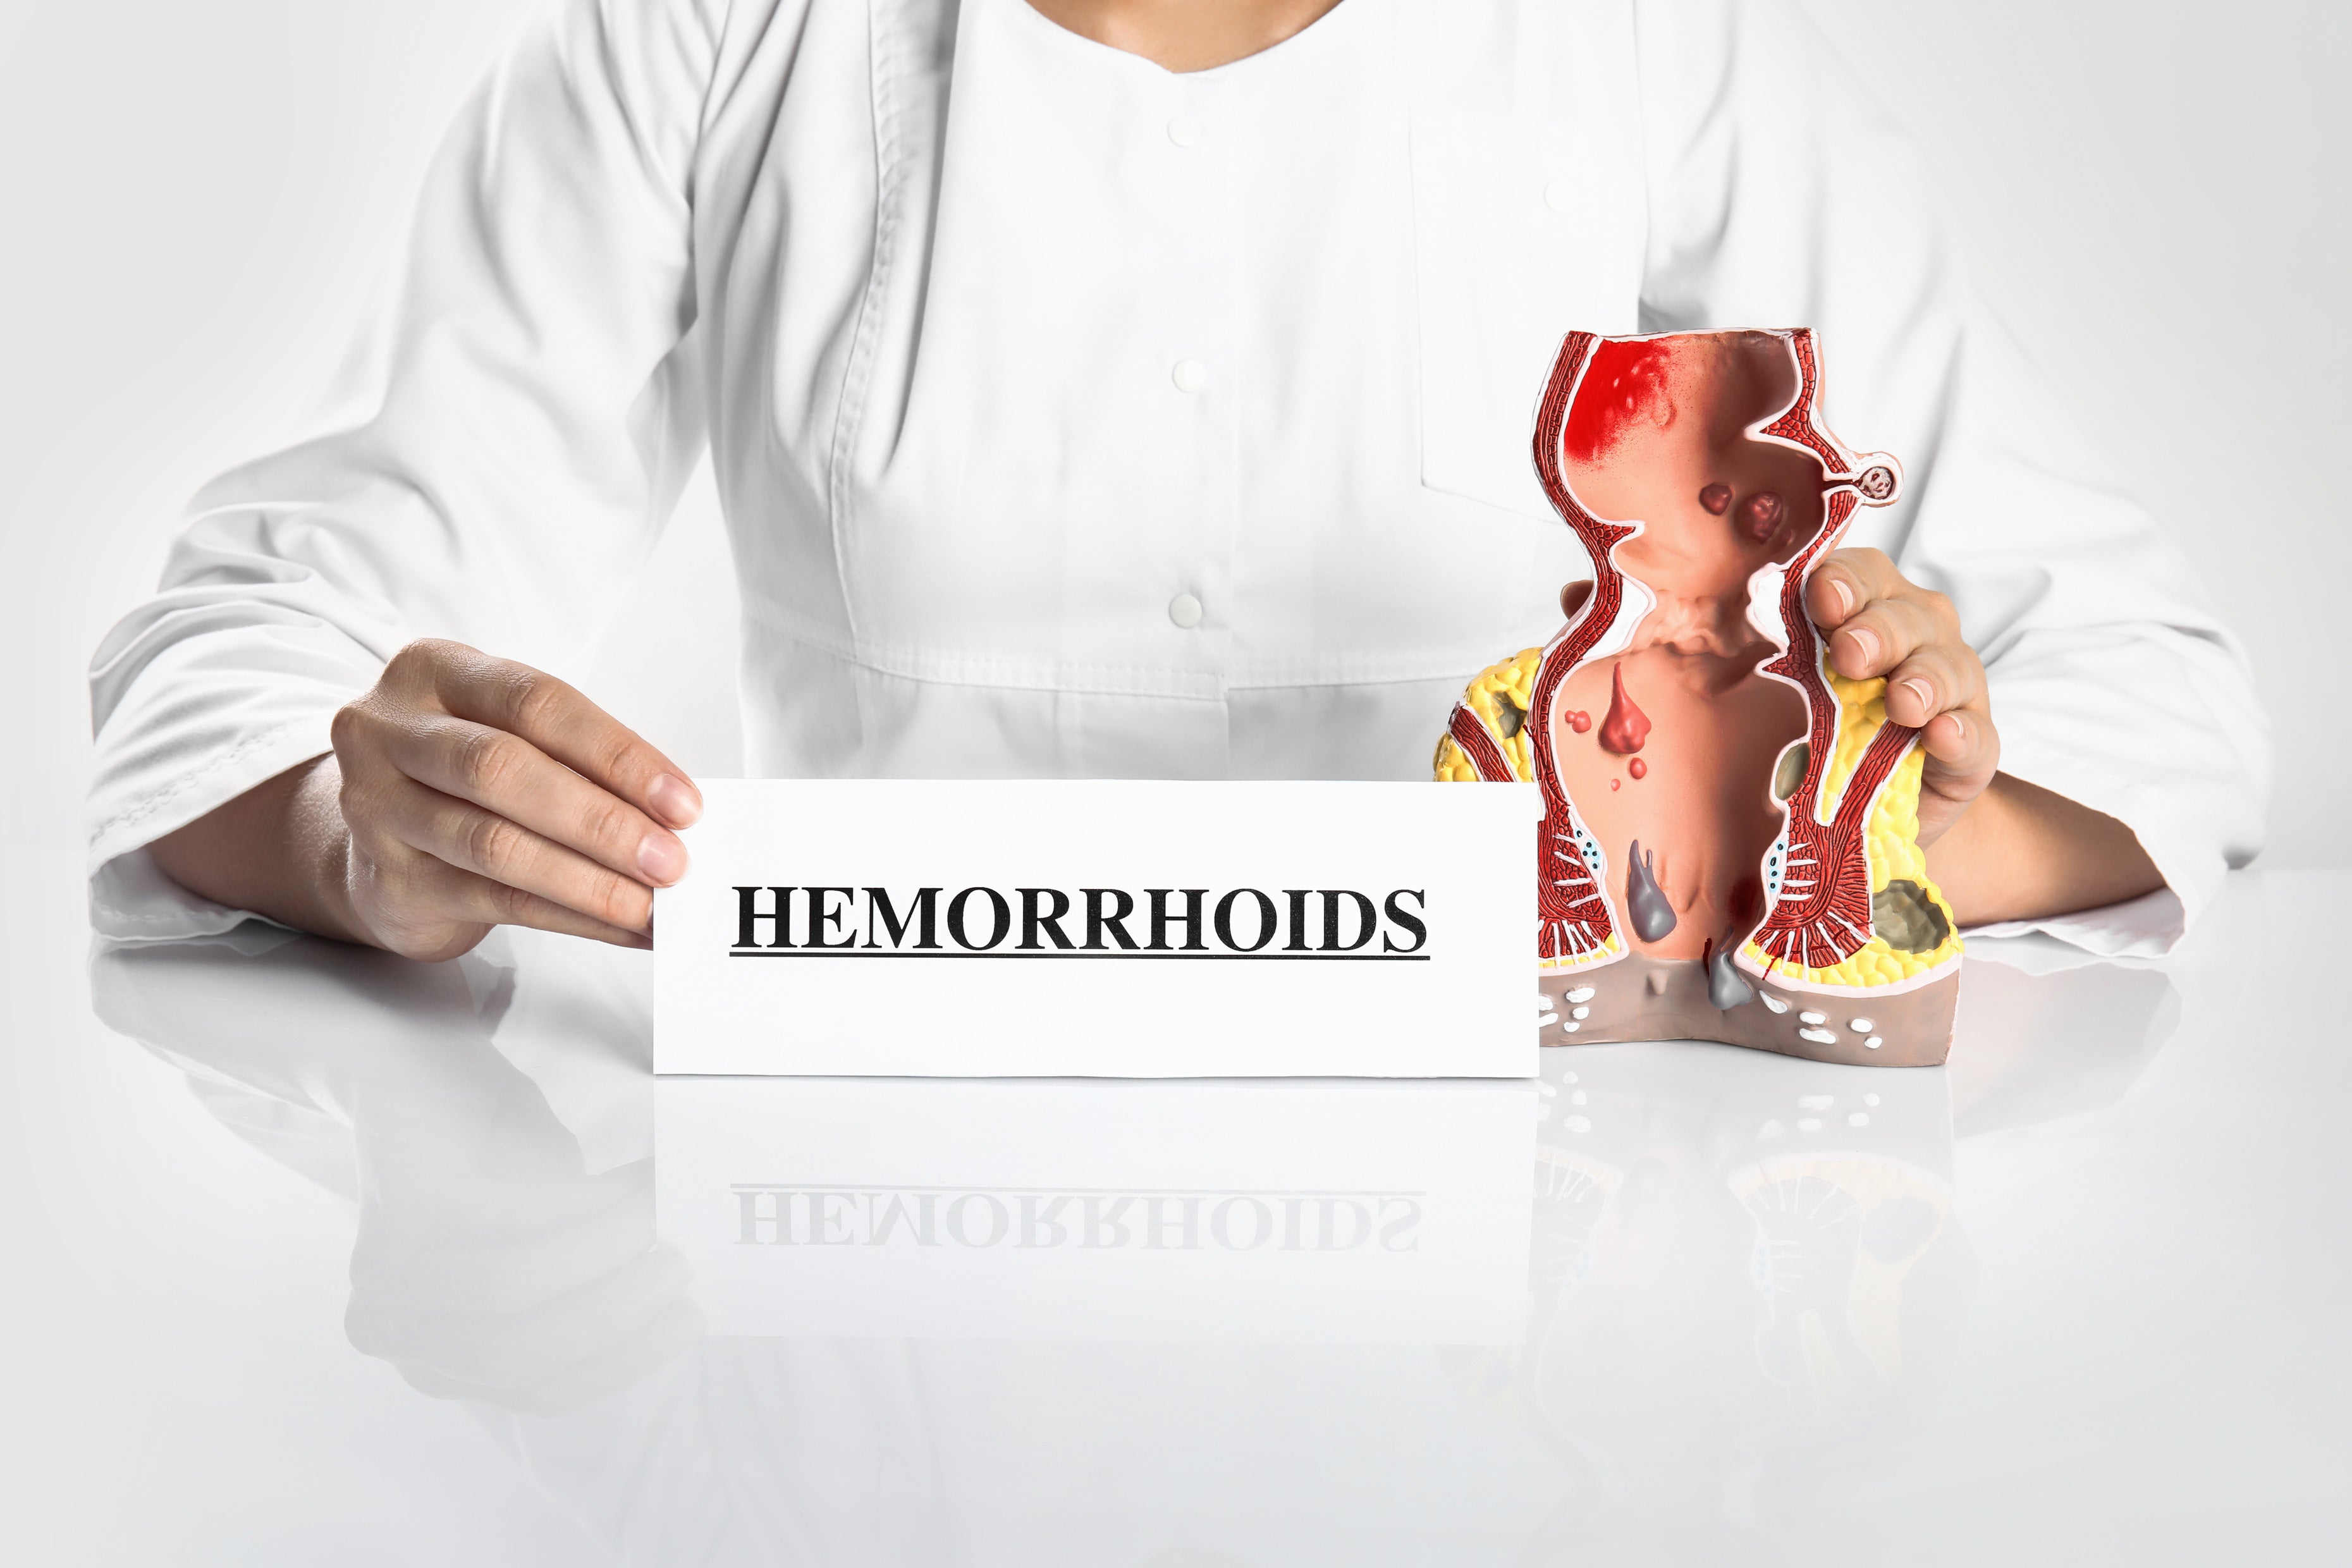 Hemorrhoid cream alternatives and advantages over-the-counter remedies